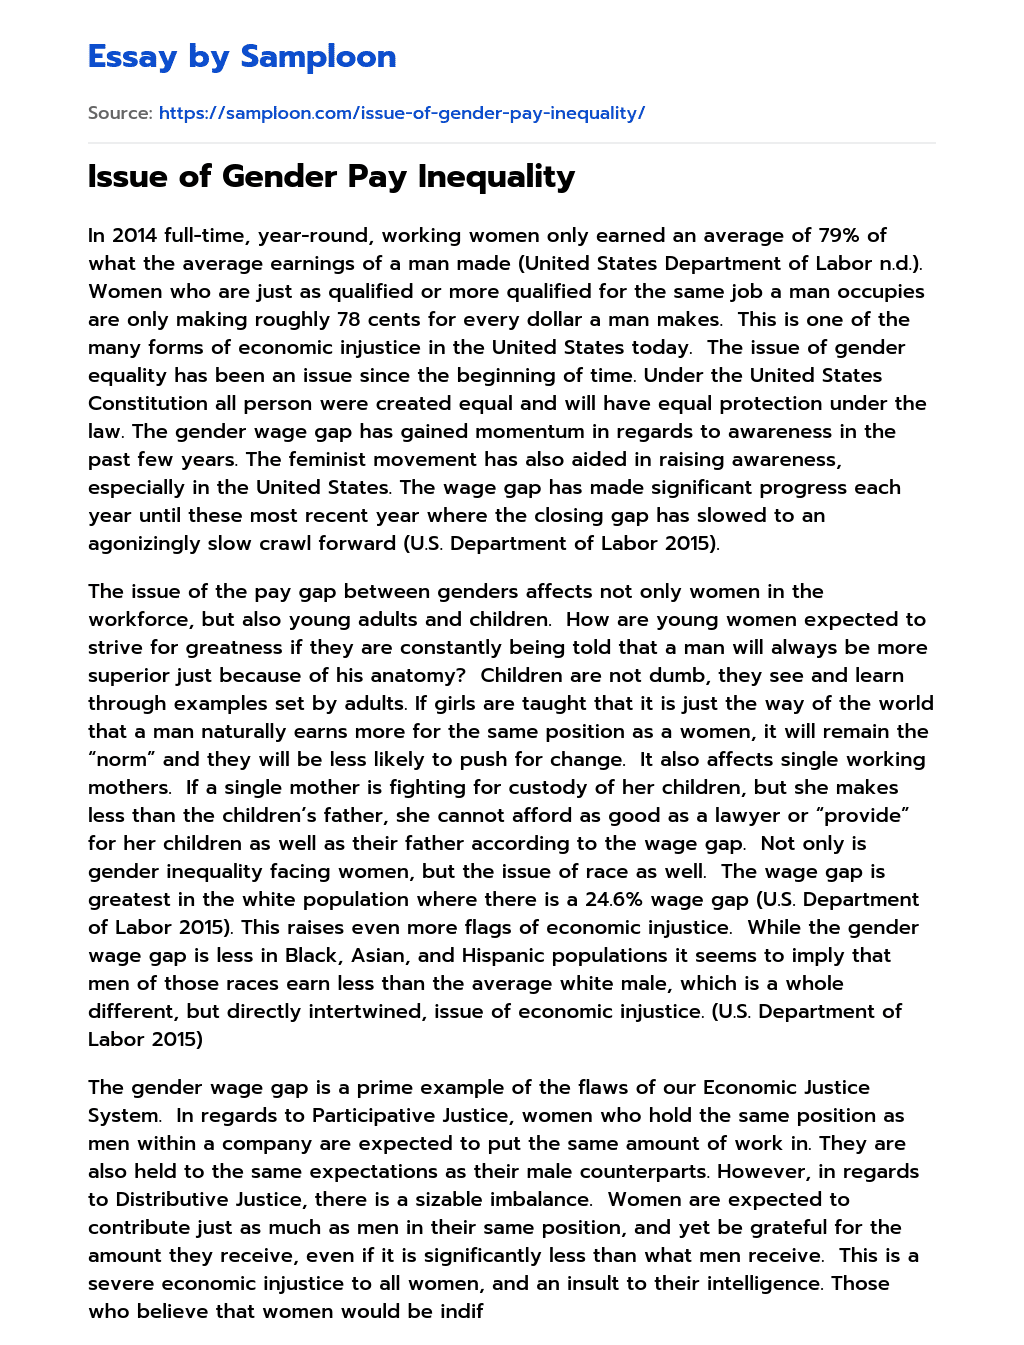 gender inequality essay conclusion